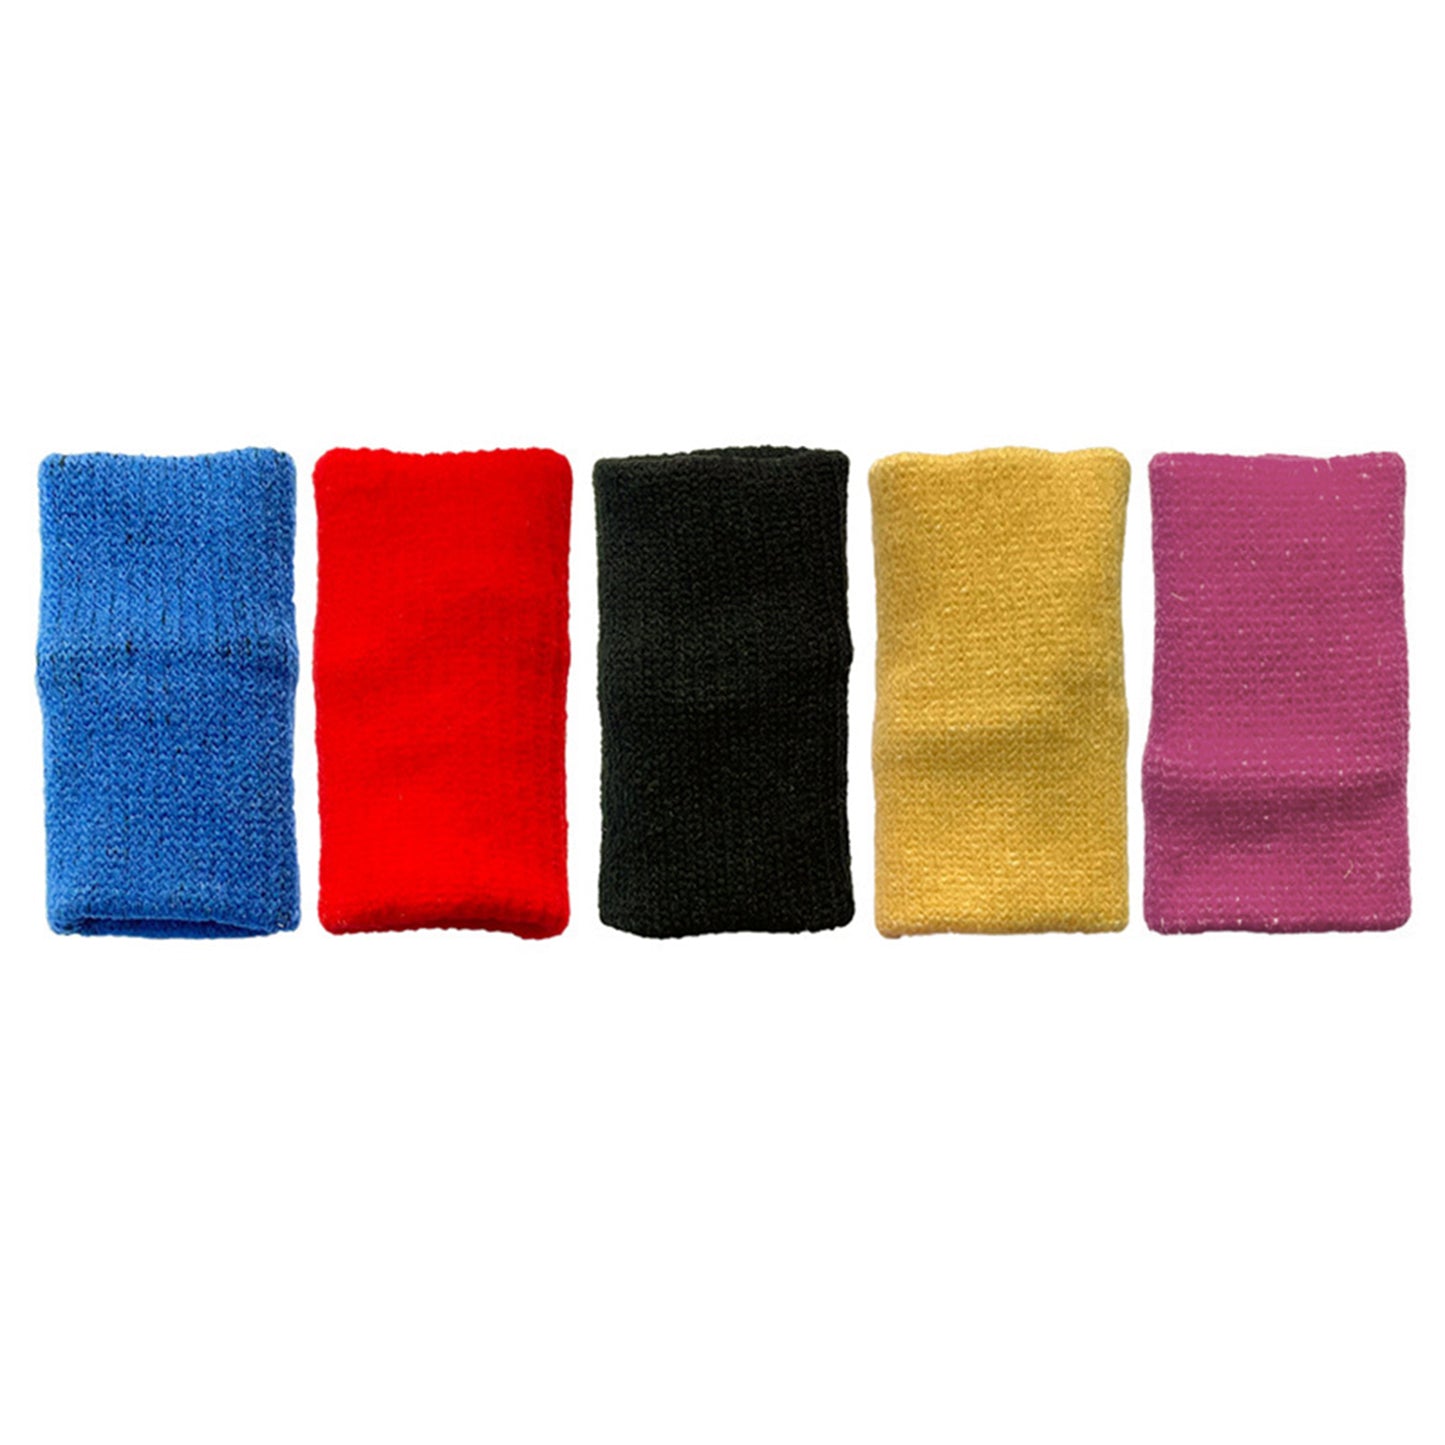 5/10pcs Stretchy Sports Finger Sleeves Arthritis Support Finger Guard for Protection Safety 5D Diamond Painting Tools